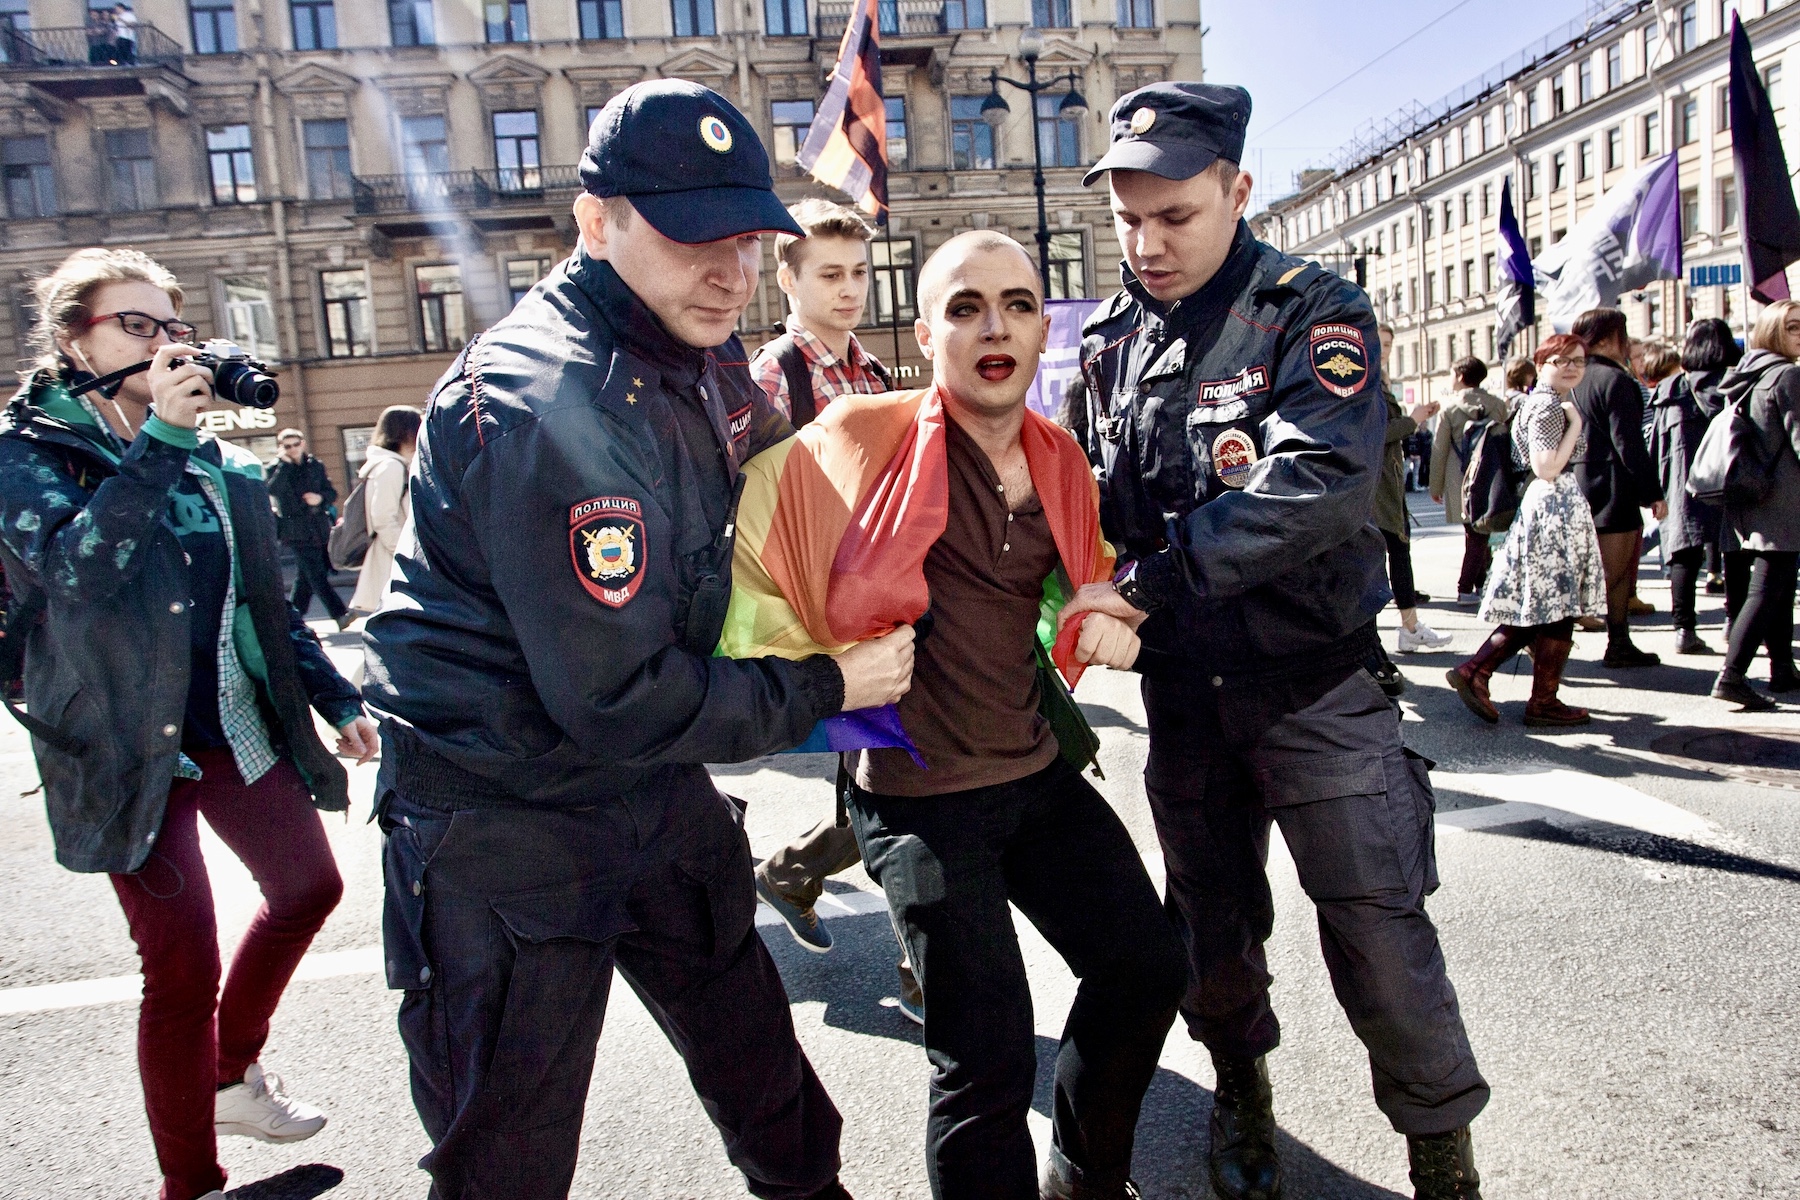 Russia Has Banned The Entire Global LGBTQ Movement As An “Extremist” Organization